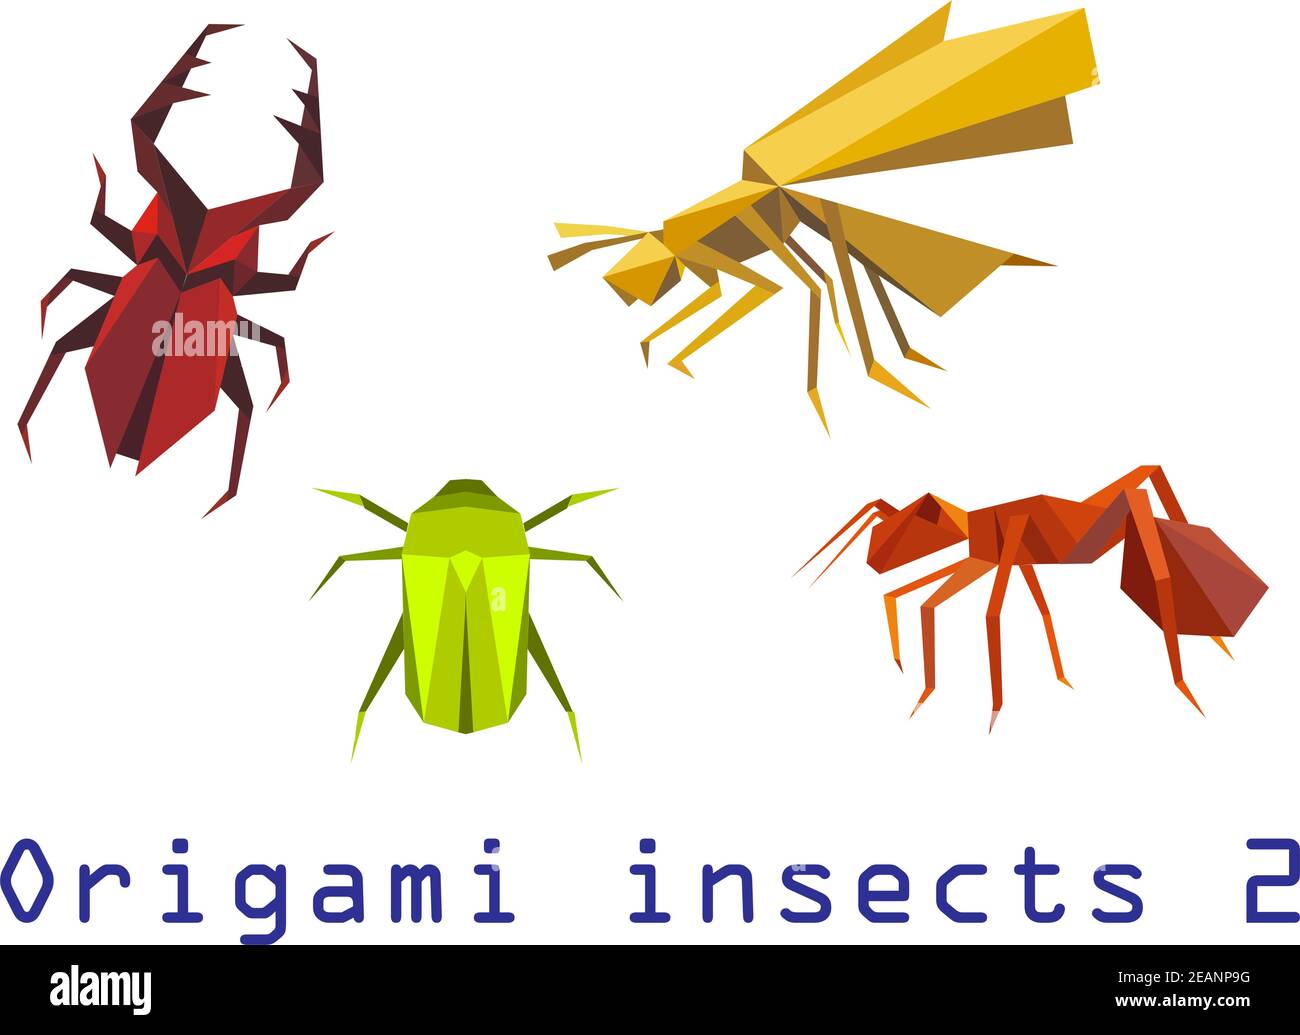 Origami insects set of staghorn, bee, ant and beetle isolated on white background. For educational or wildlife design Stock Vector